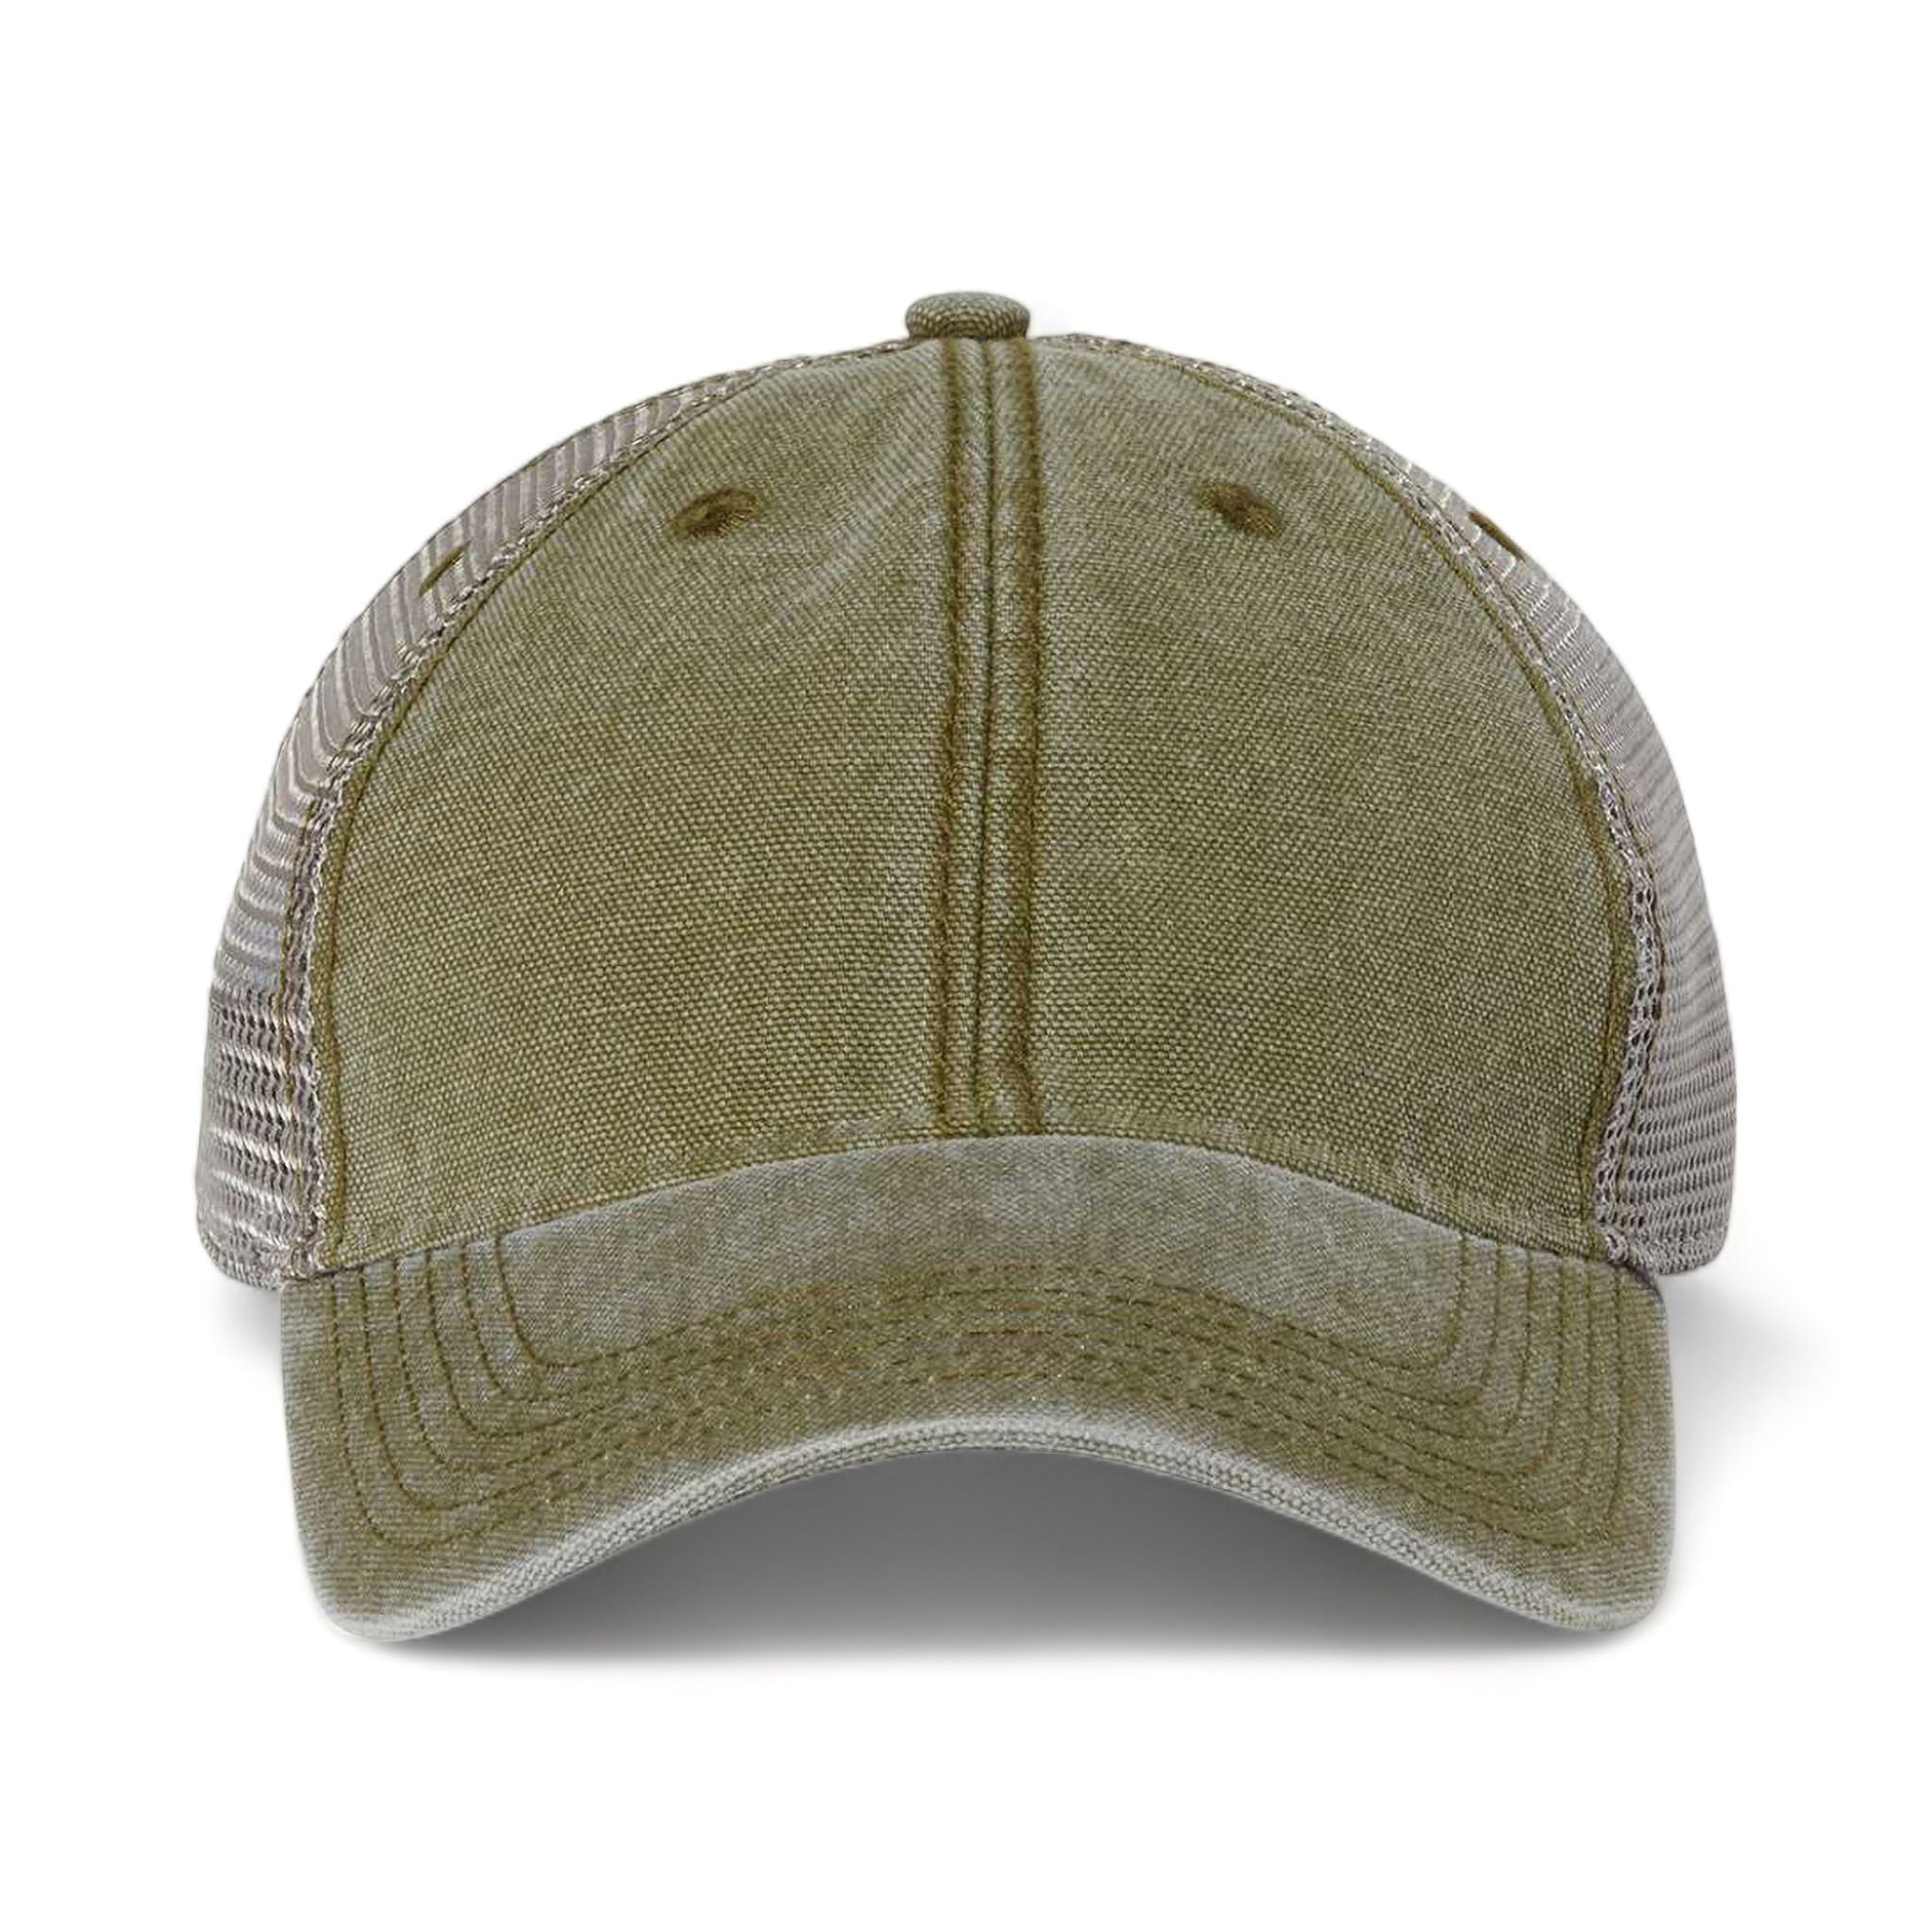 Front view of LEGACY DTA custom hat in olive and grey